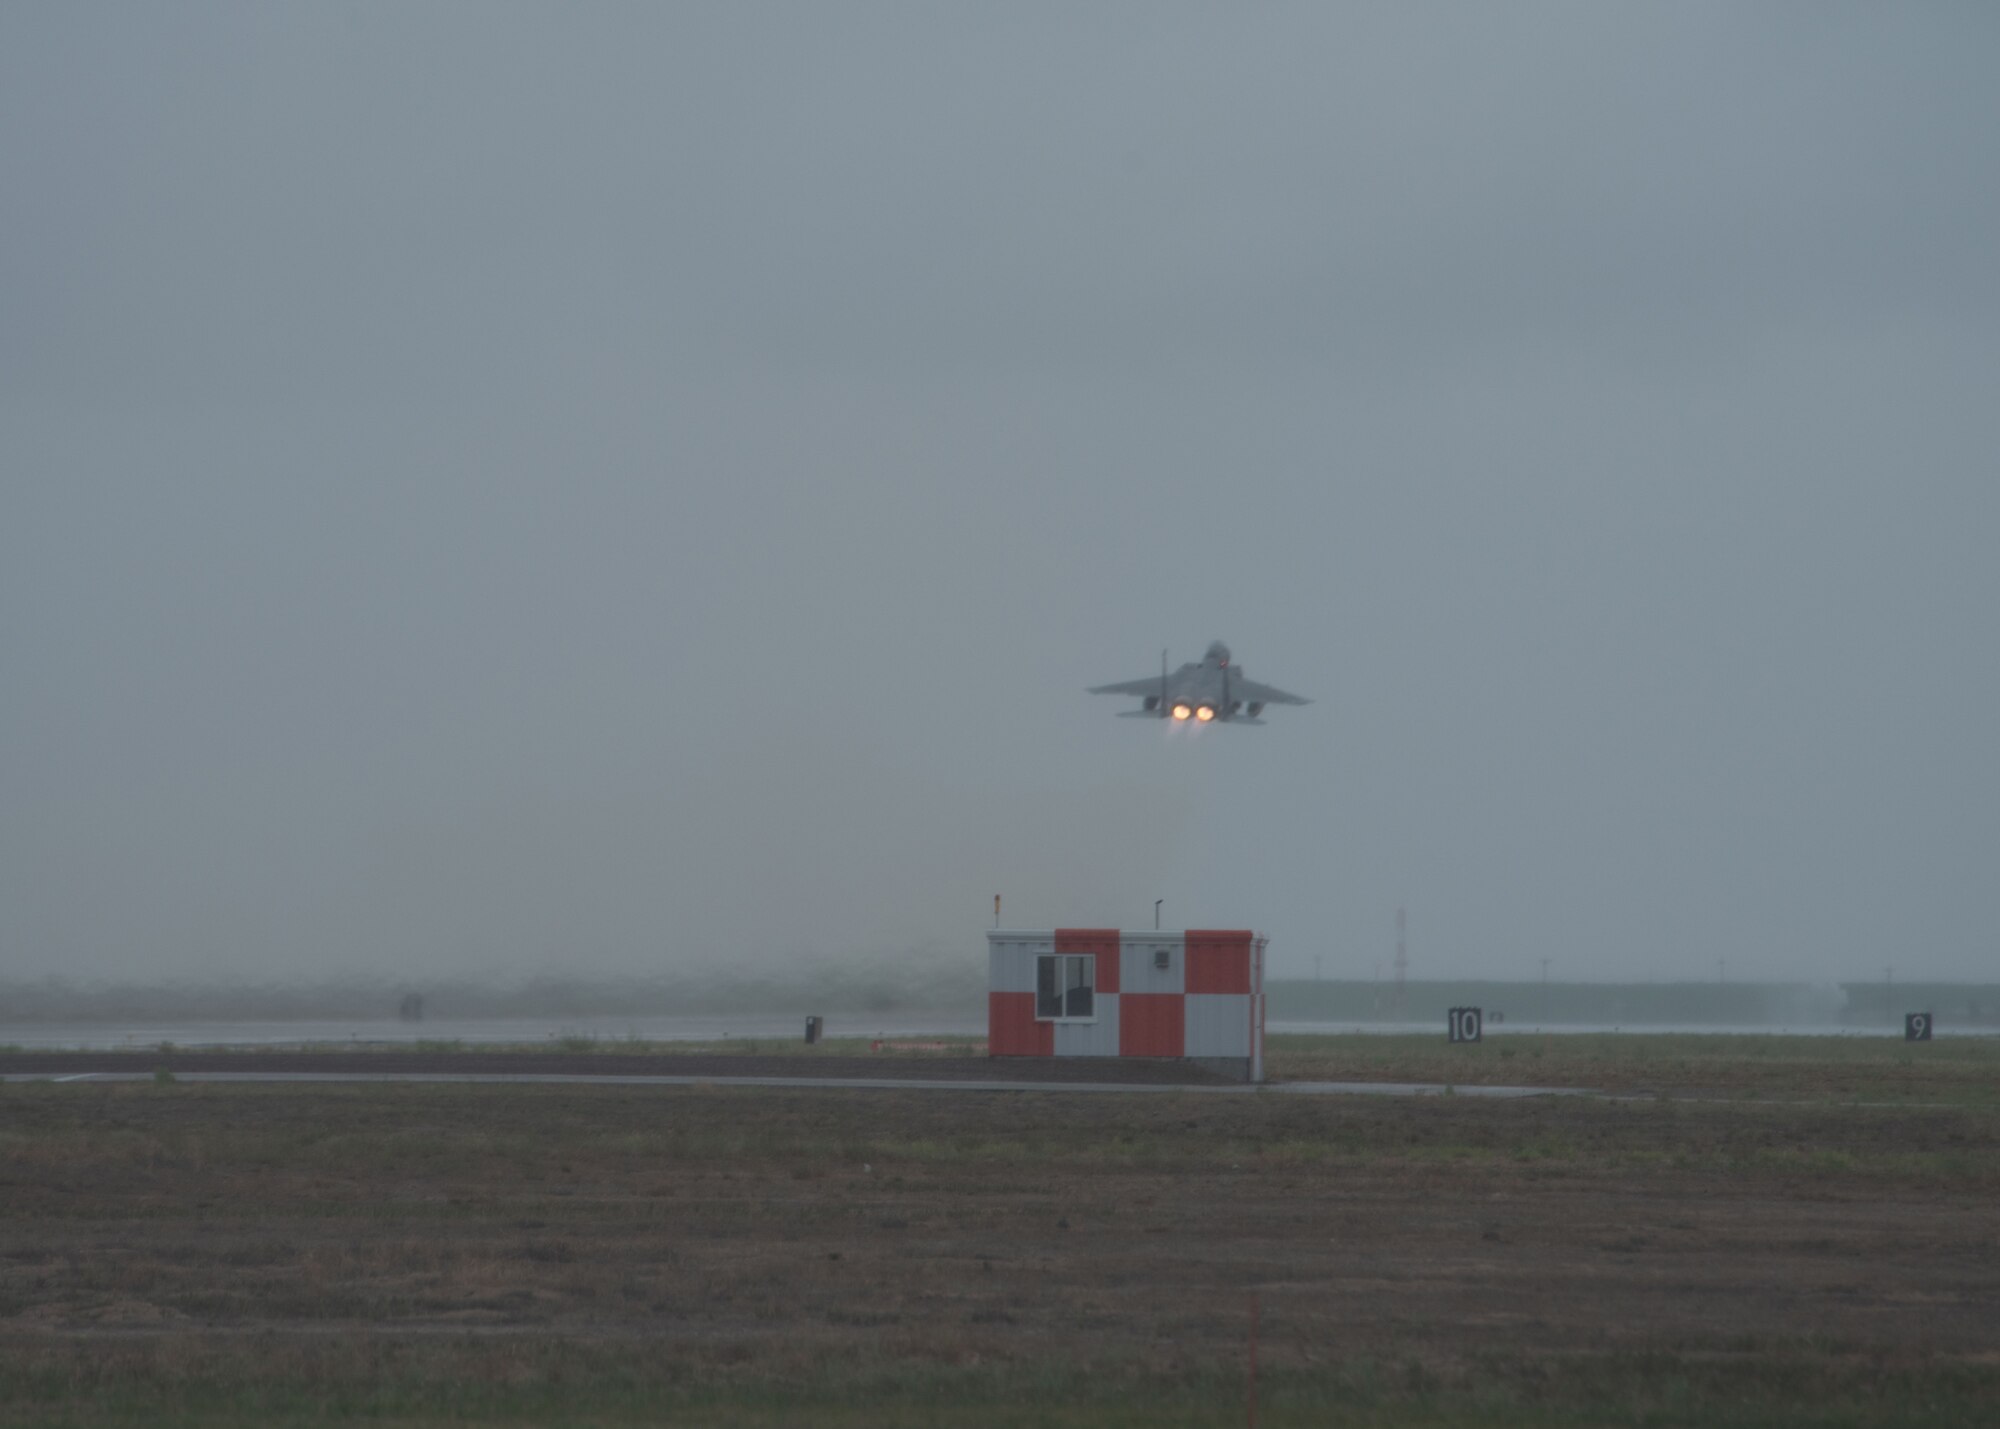 A F-15 jet aircraft takes off from the flight line runway.